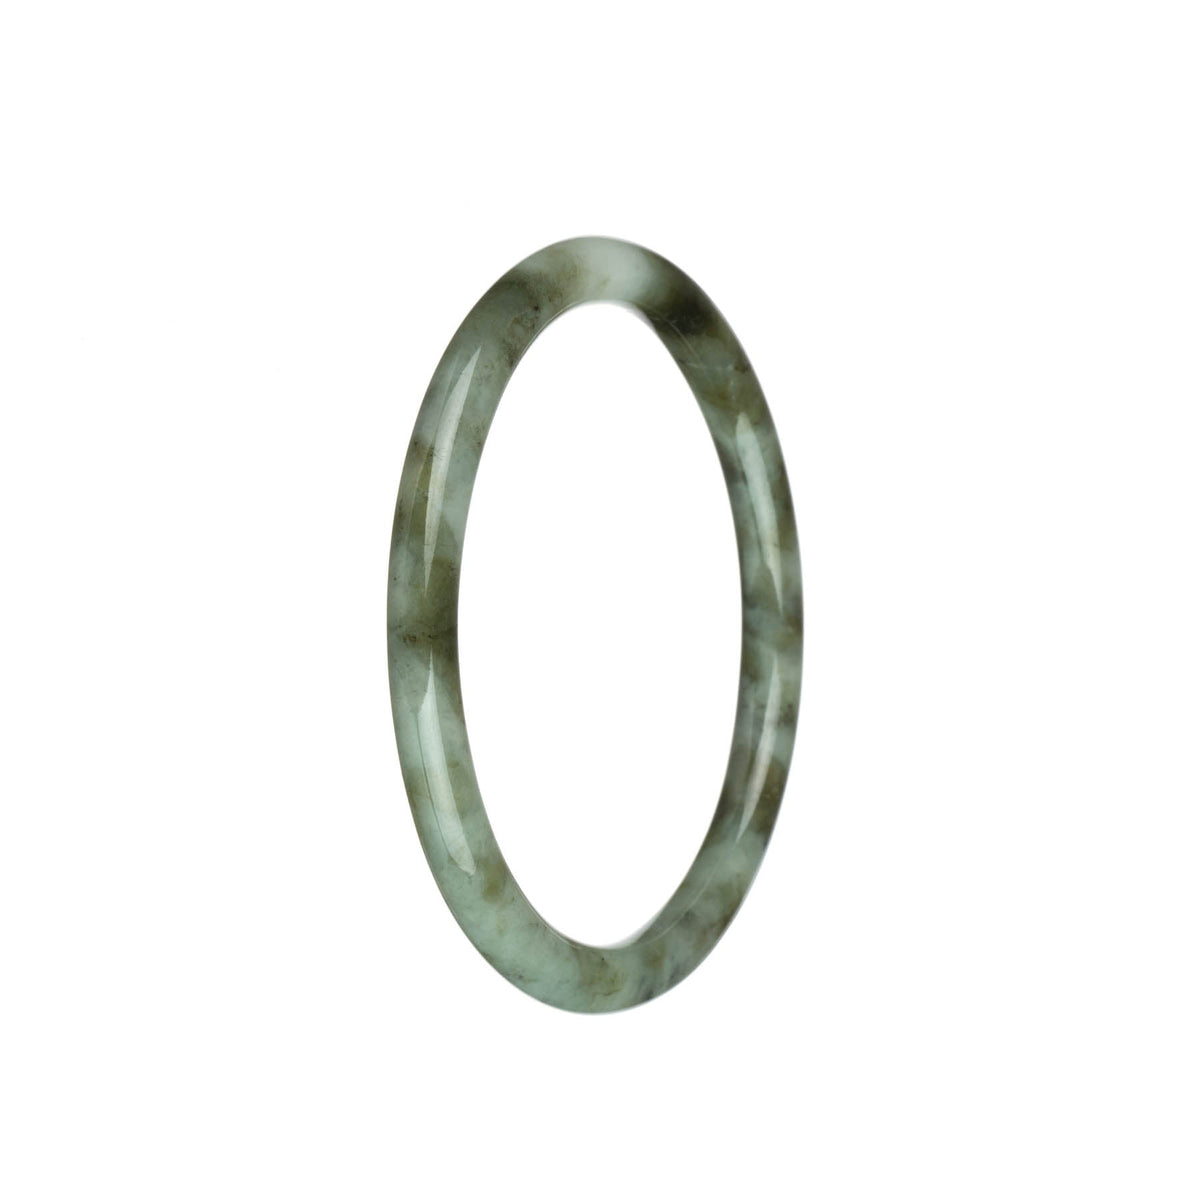 Certified Untreated White with Olive Green Patterns Traditional Jade Bangle - 62mm Petite Round